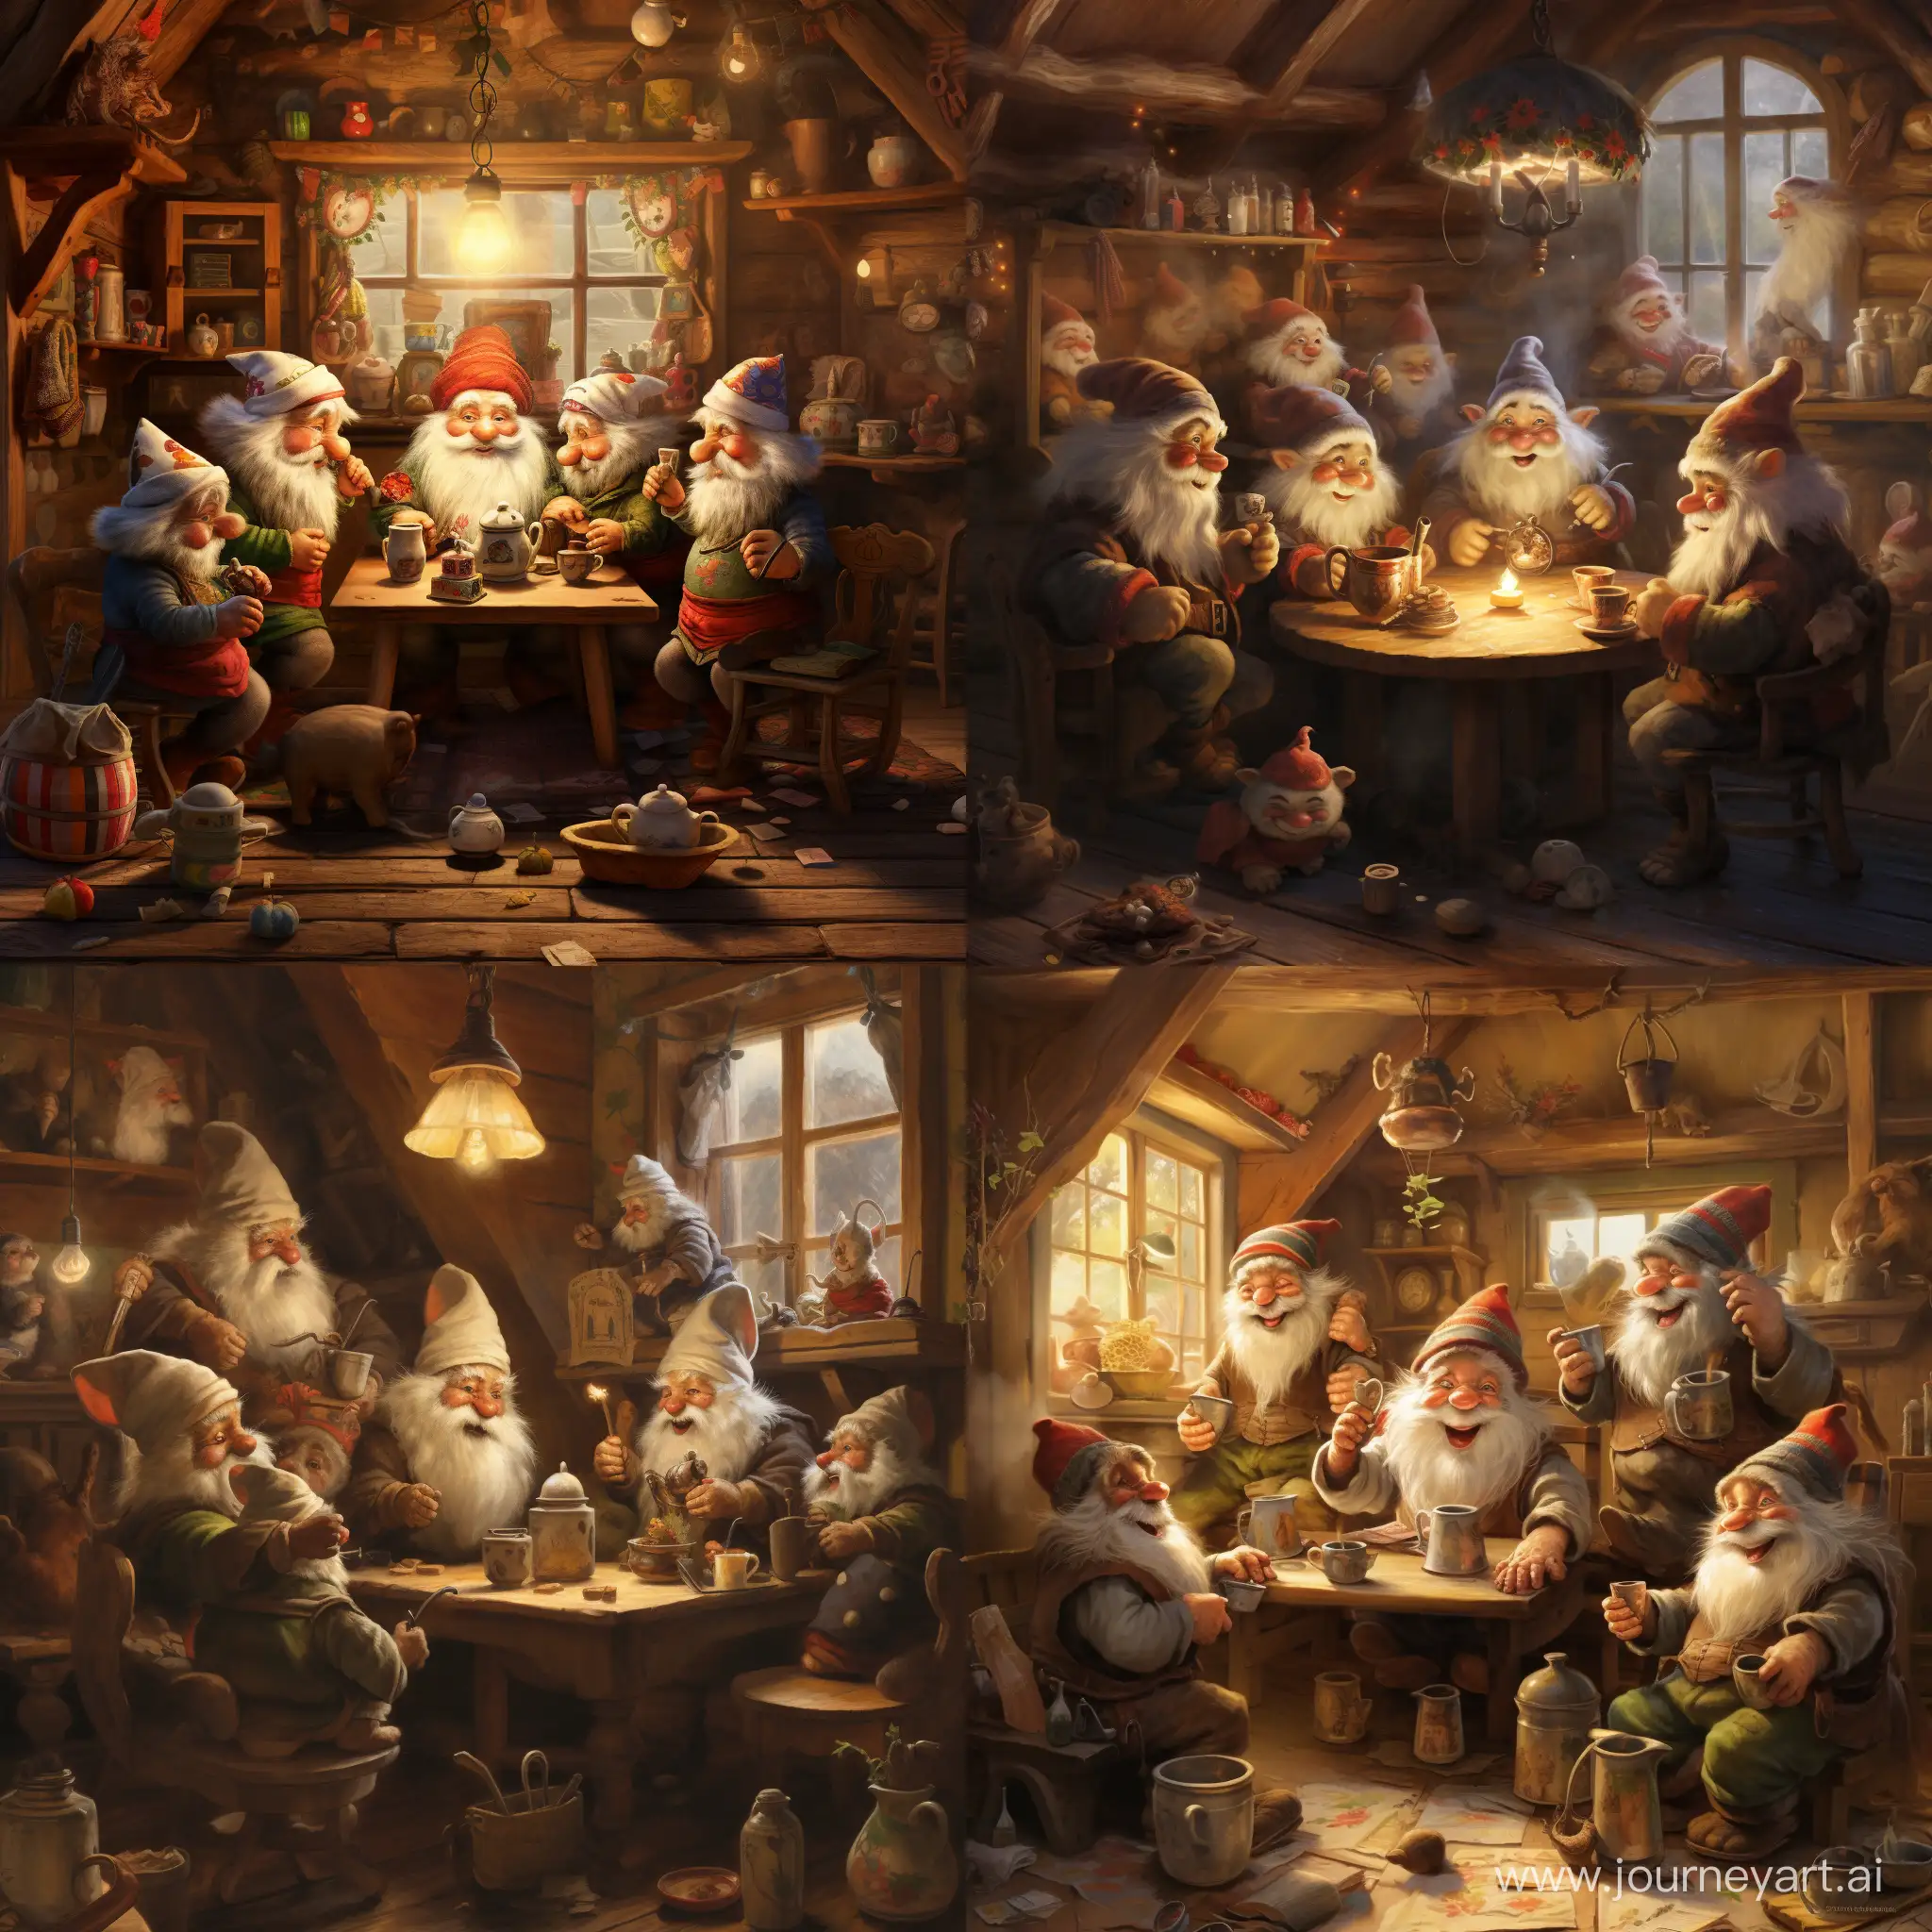 Gnomes-Celebrating-New-Year-in-a-Realistic-Tea-House-Scene